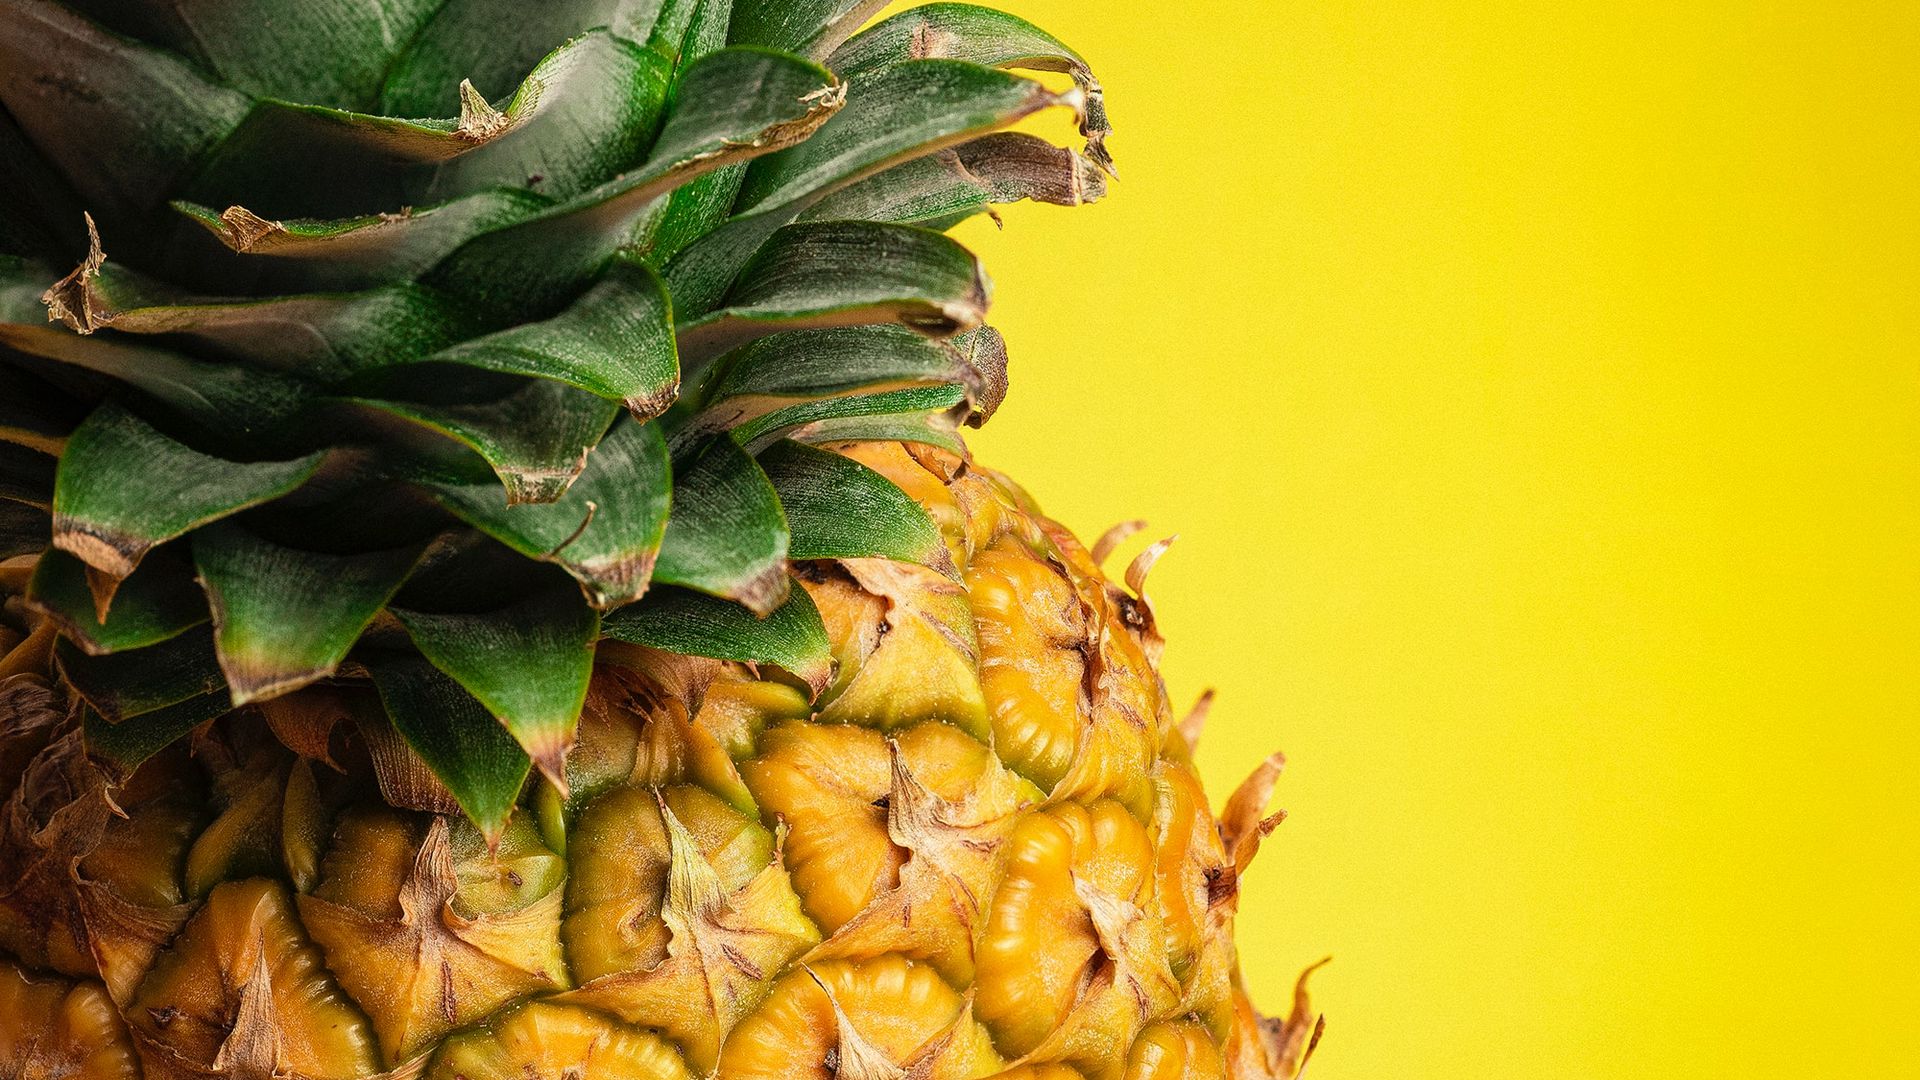 Download wallpaper 1920x1080 pineapple, fruit, tropical, yellow full hd, hdtv, fhd, 1080p HD background